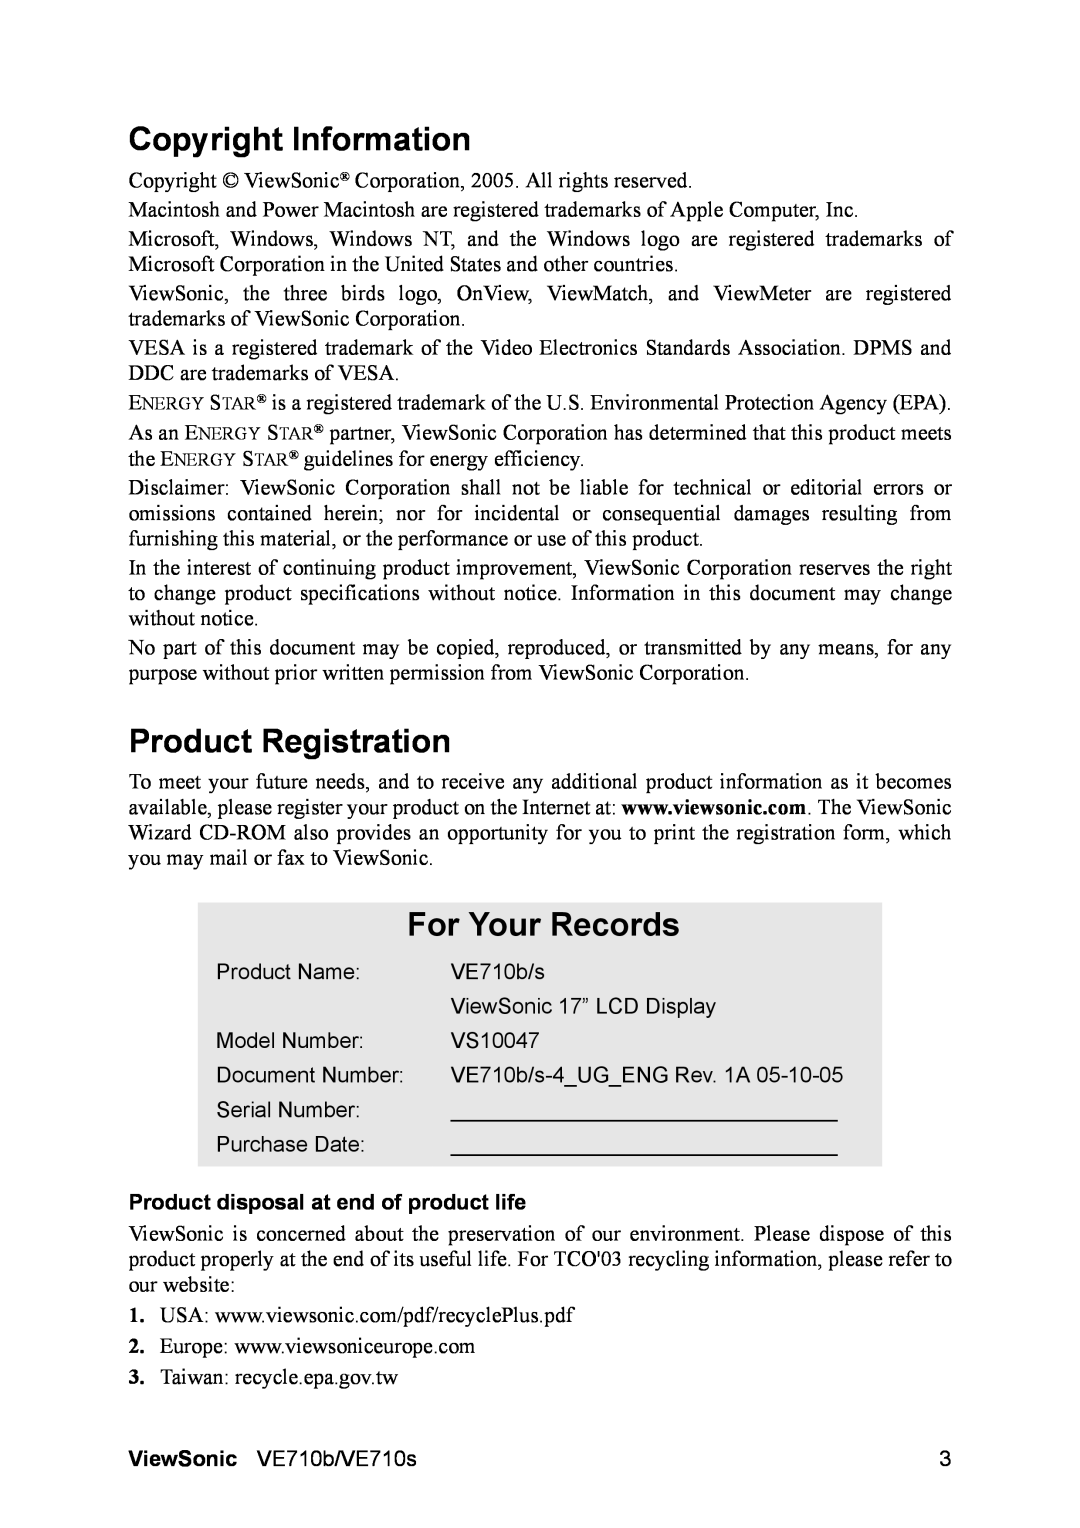 ViewSonic VE710b Copyright Information, Product Registration, For Your Records, Product disposal at end of product life 